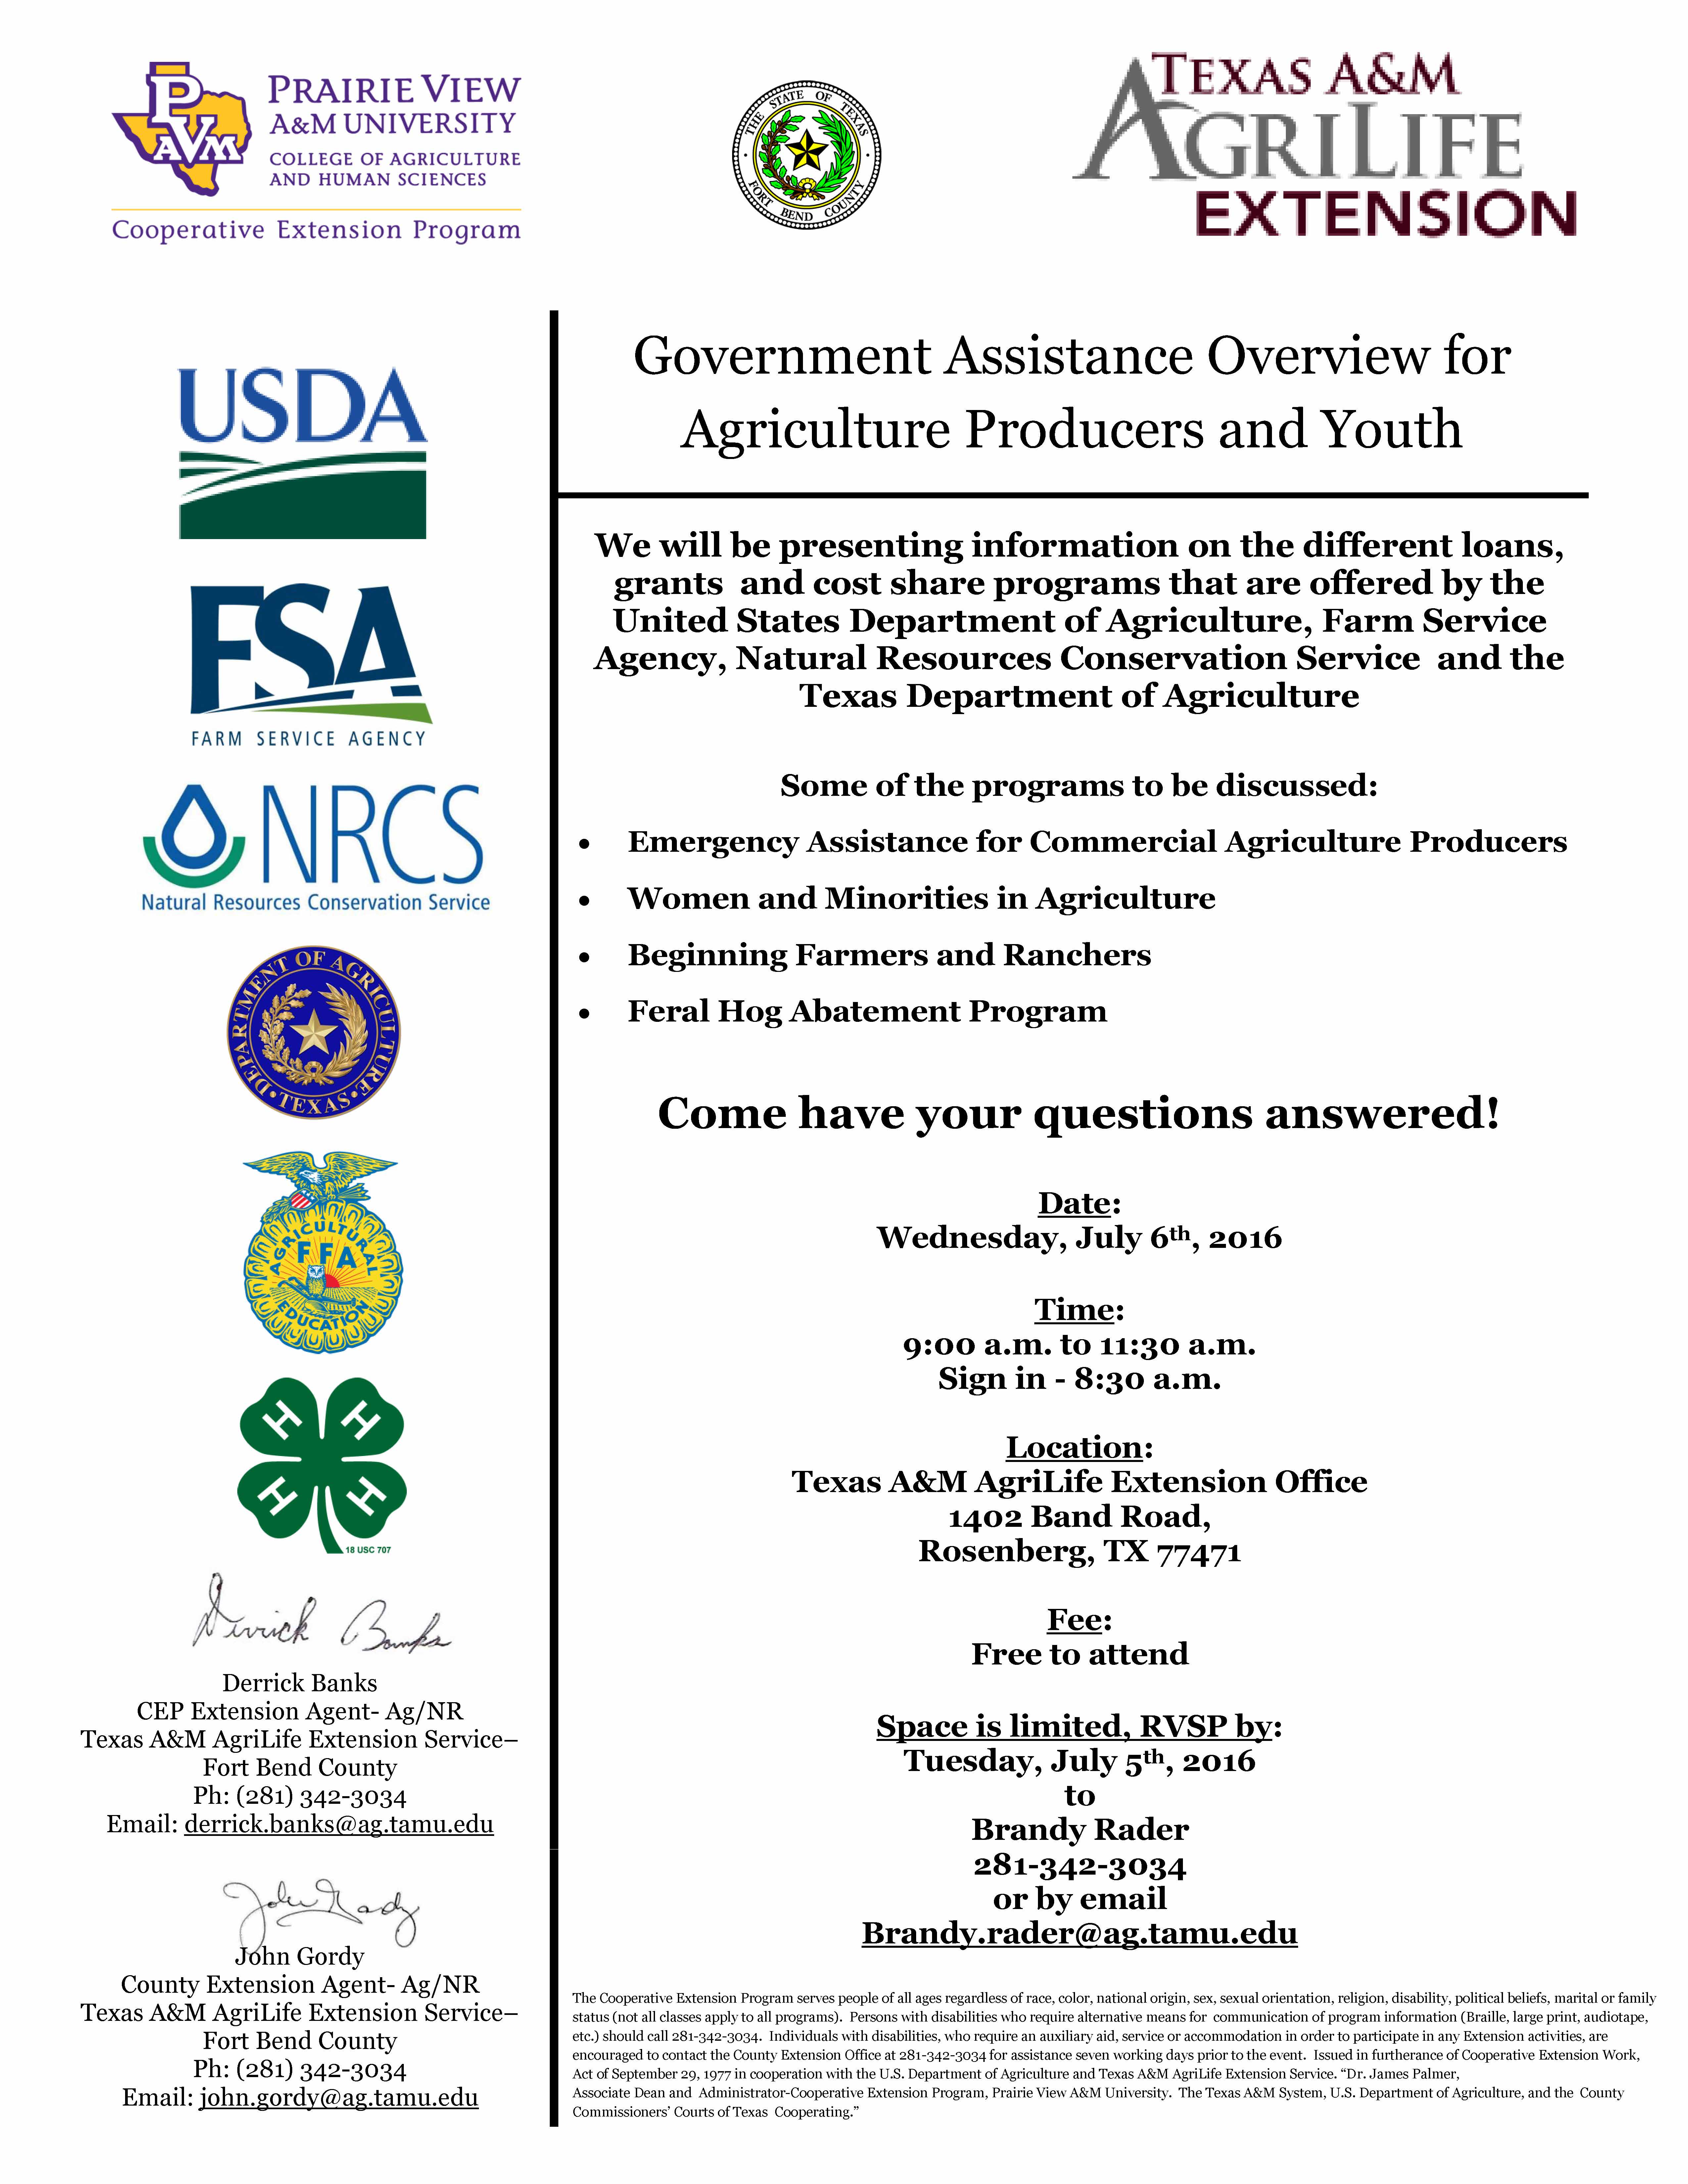 Government Assistance Overview for Agriculture Producers and Youth5100 x 6600